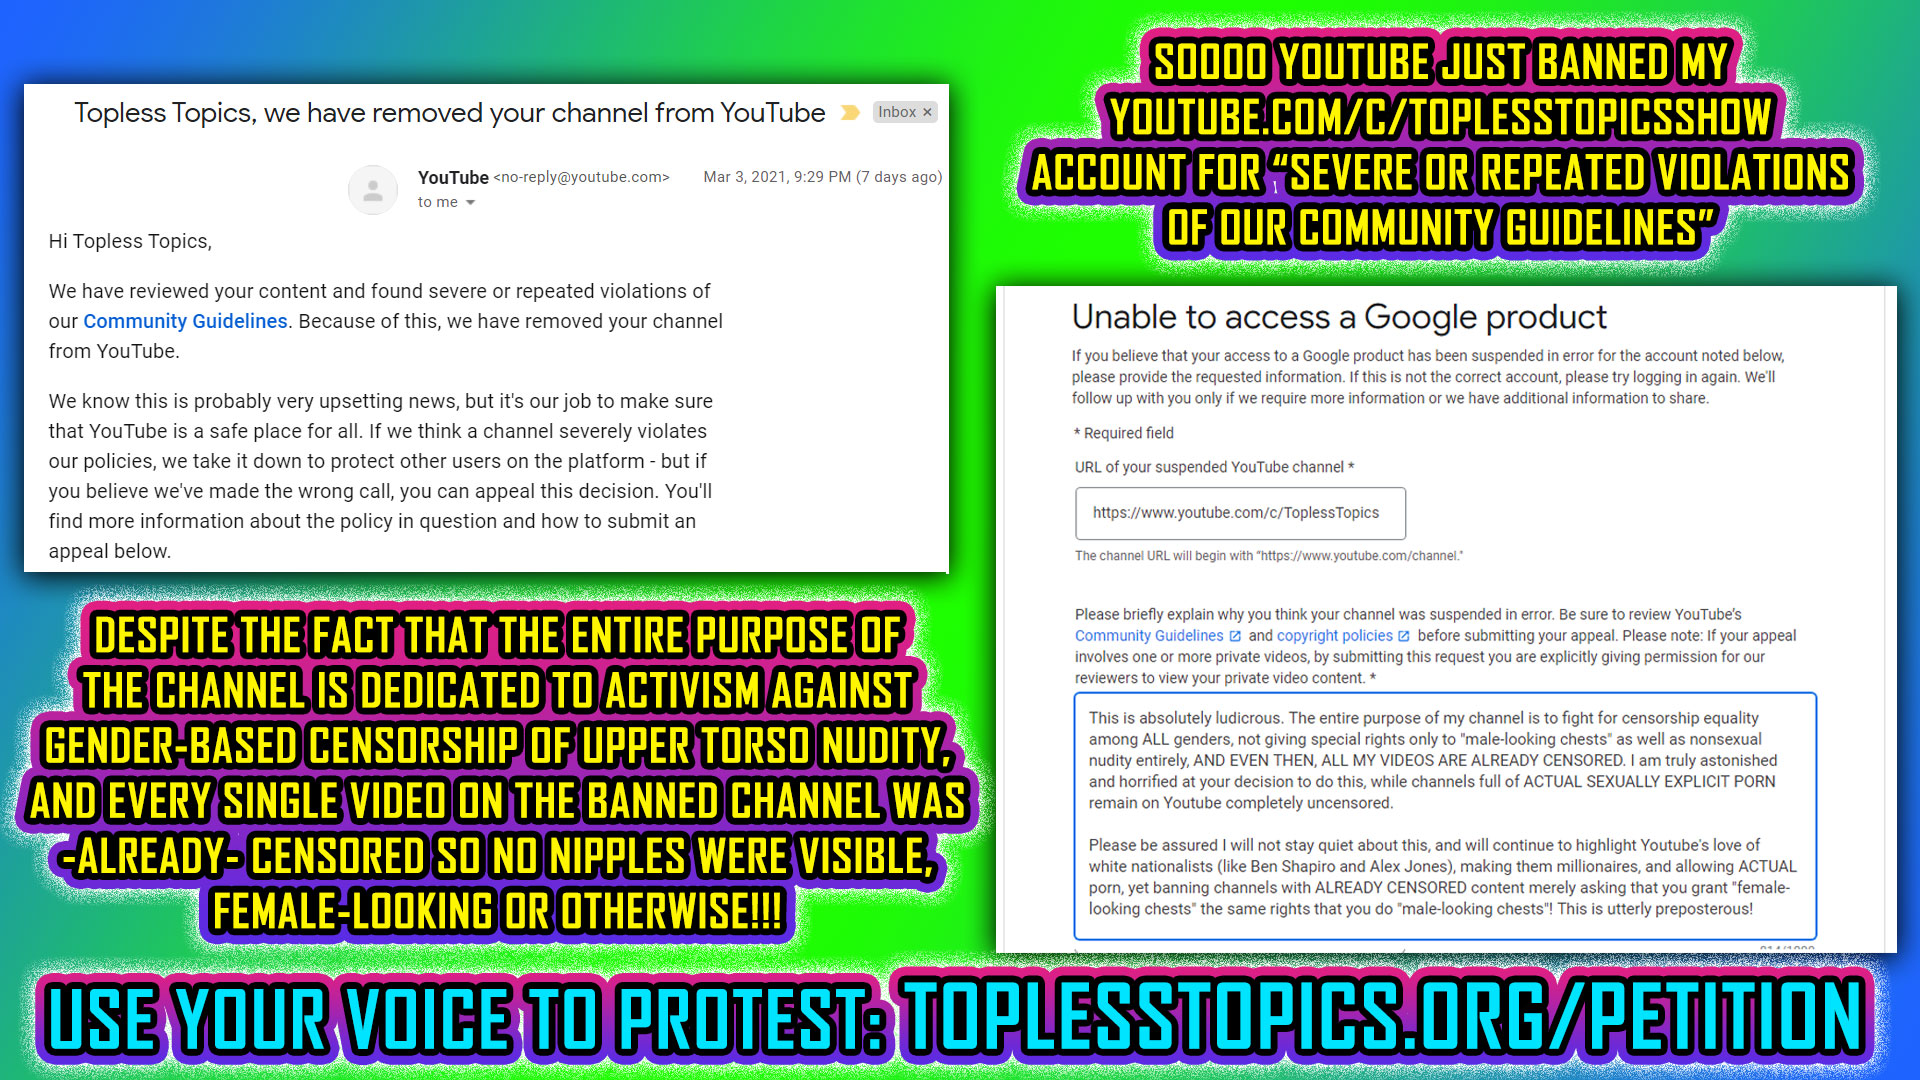 Sign the petition to end sexist, transphobic bans by youtube, facebook, instagram, etc